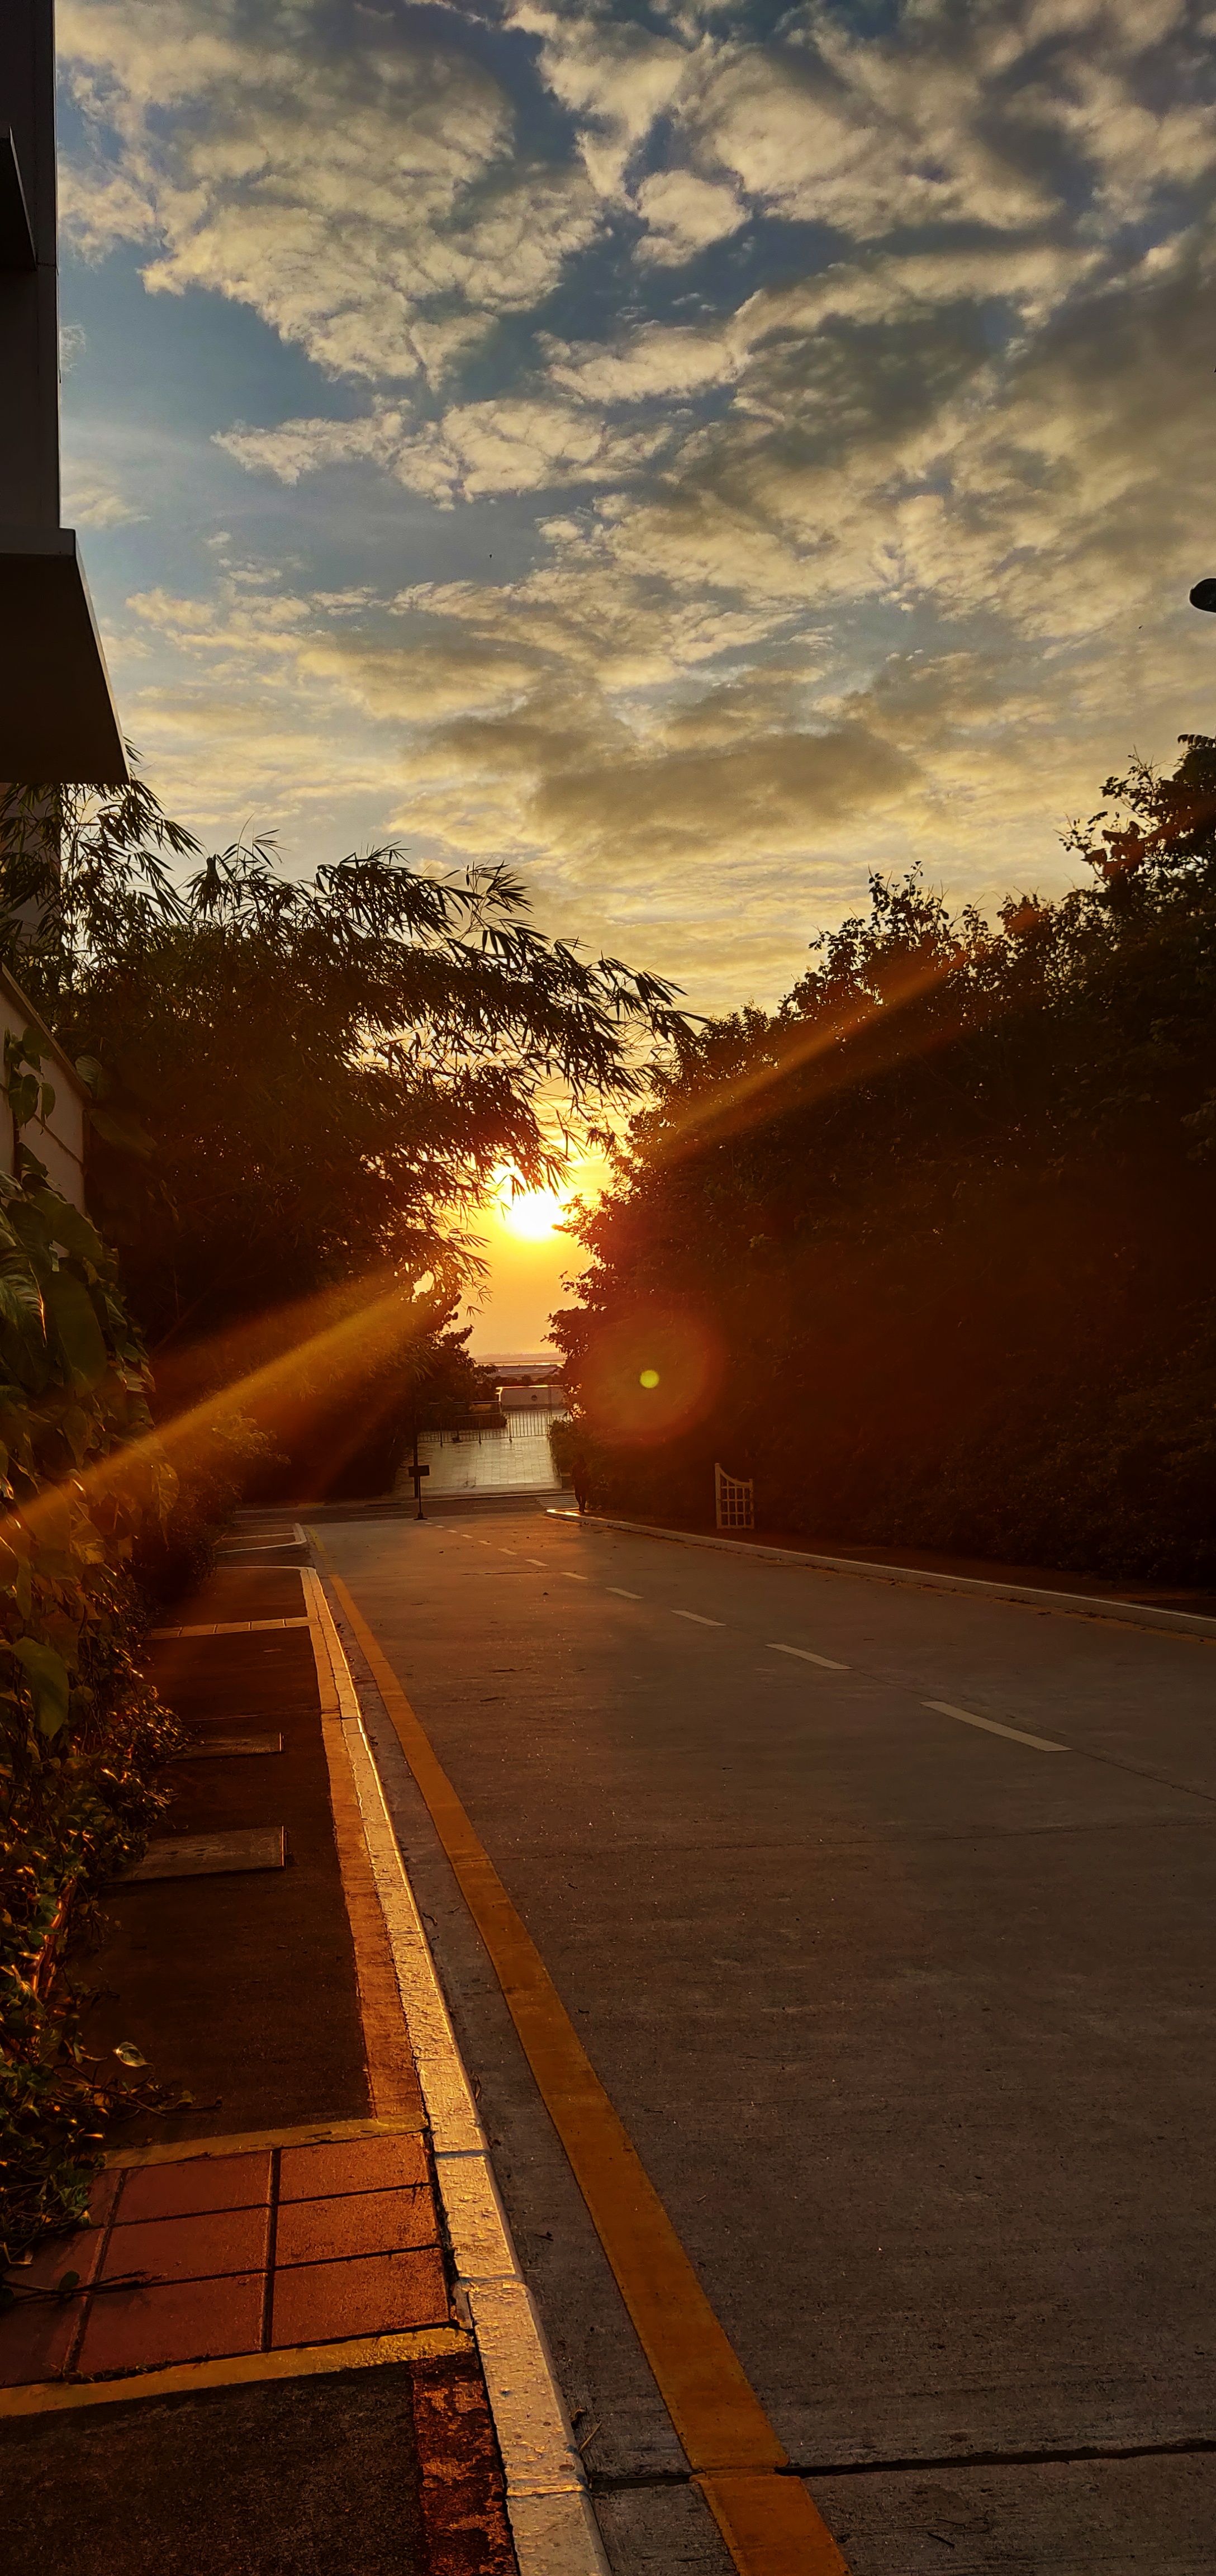 Sunset from Infosys mangalore sez campus